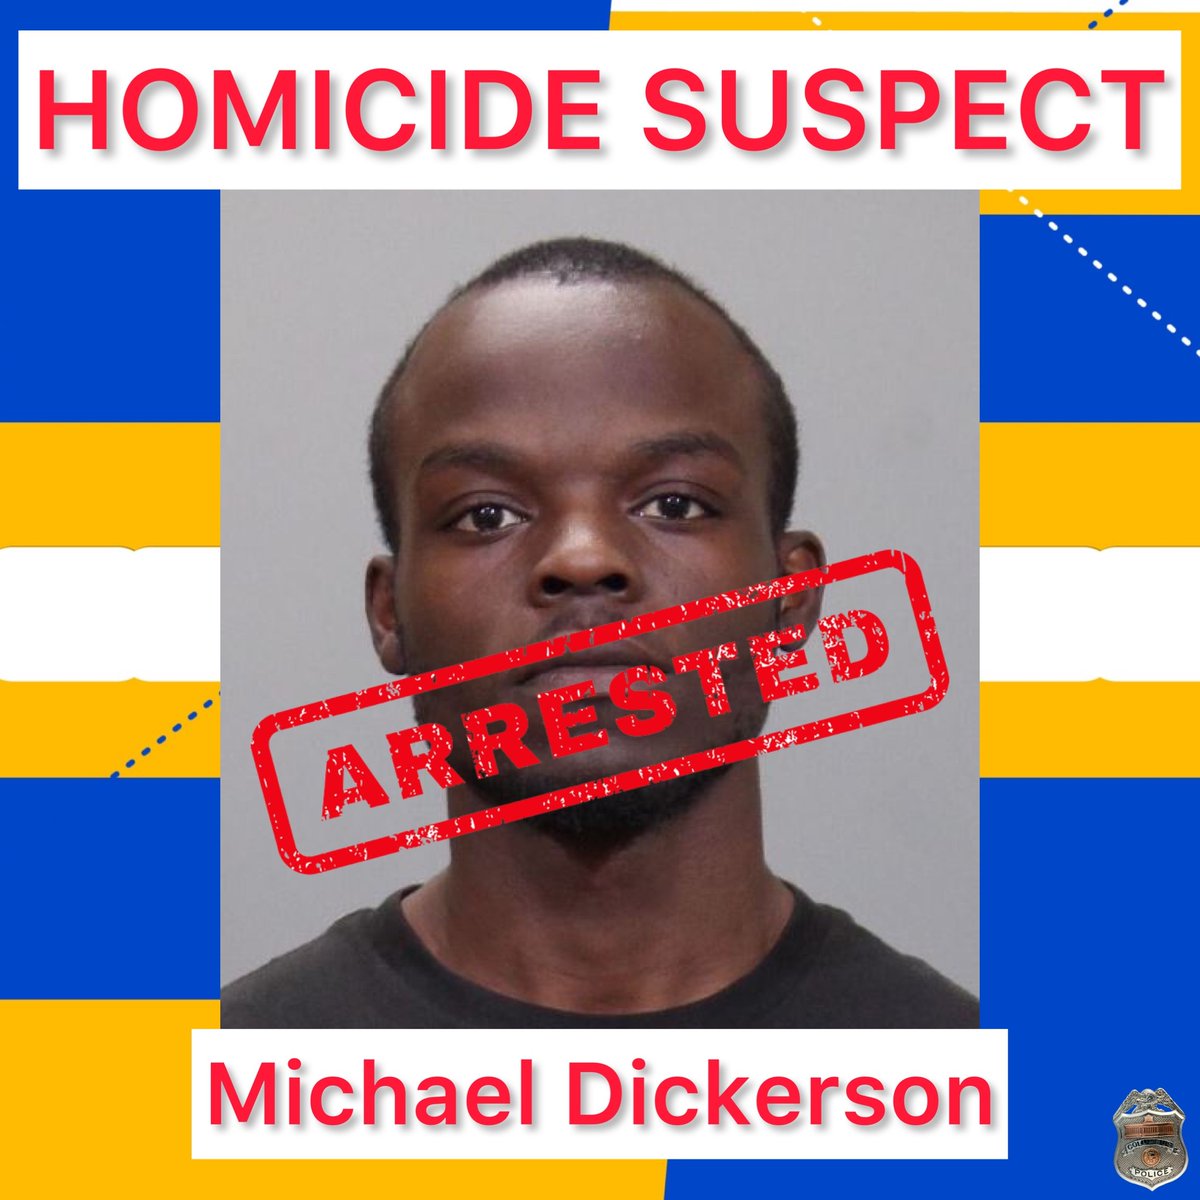 SWAT & K-9 Unit along with help from the U.S. Marshals' Southern Ohio Fugitive Apprehension Strike Team (SOFAST) arrested a fugitive charged in a 2022 deadly shooting. Michael Dickerson was taken into custody by officers today on S. Ashburton Rd. in Columbus